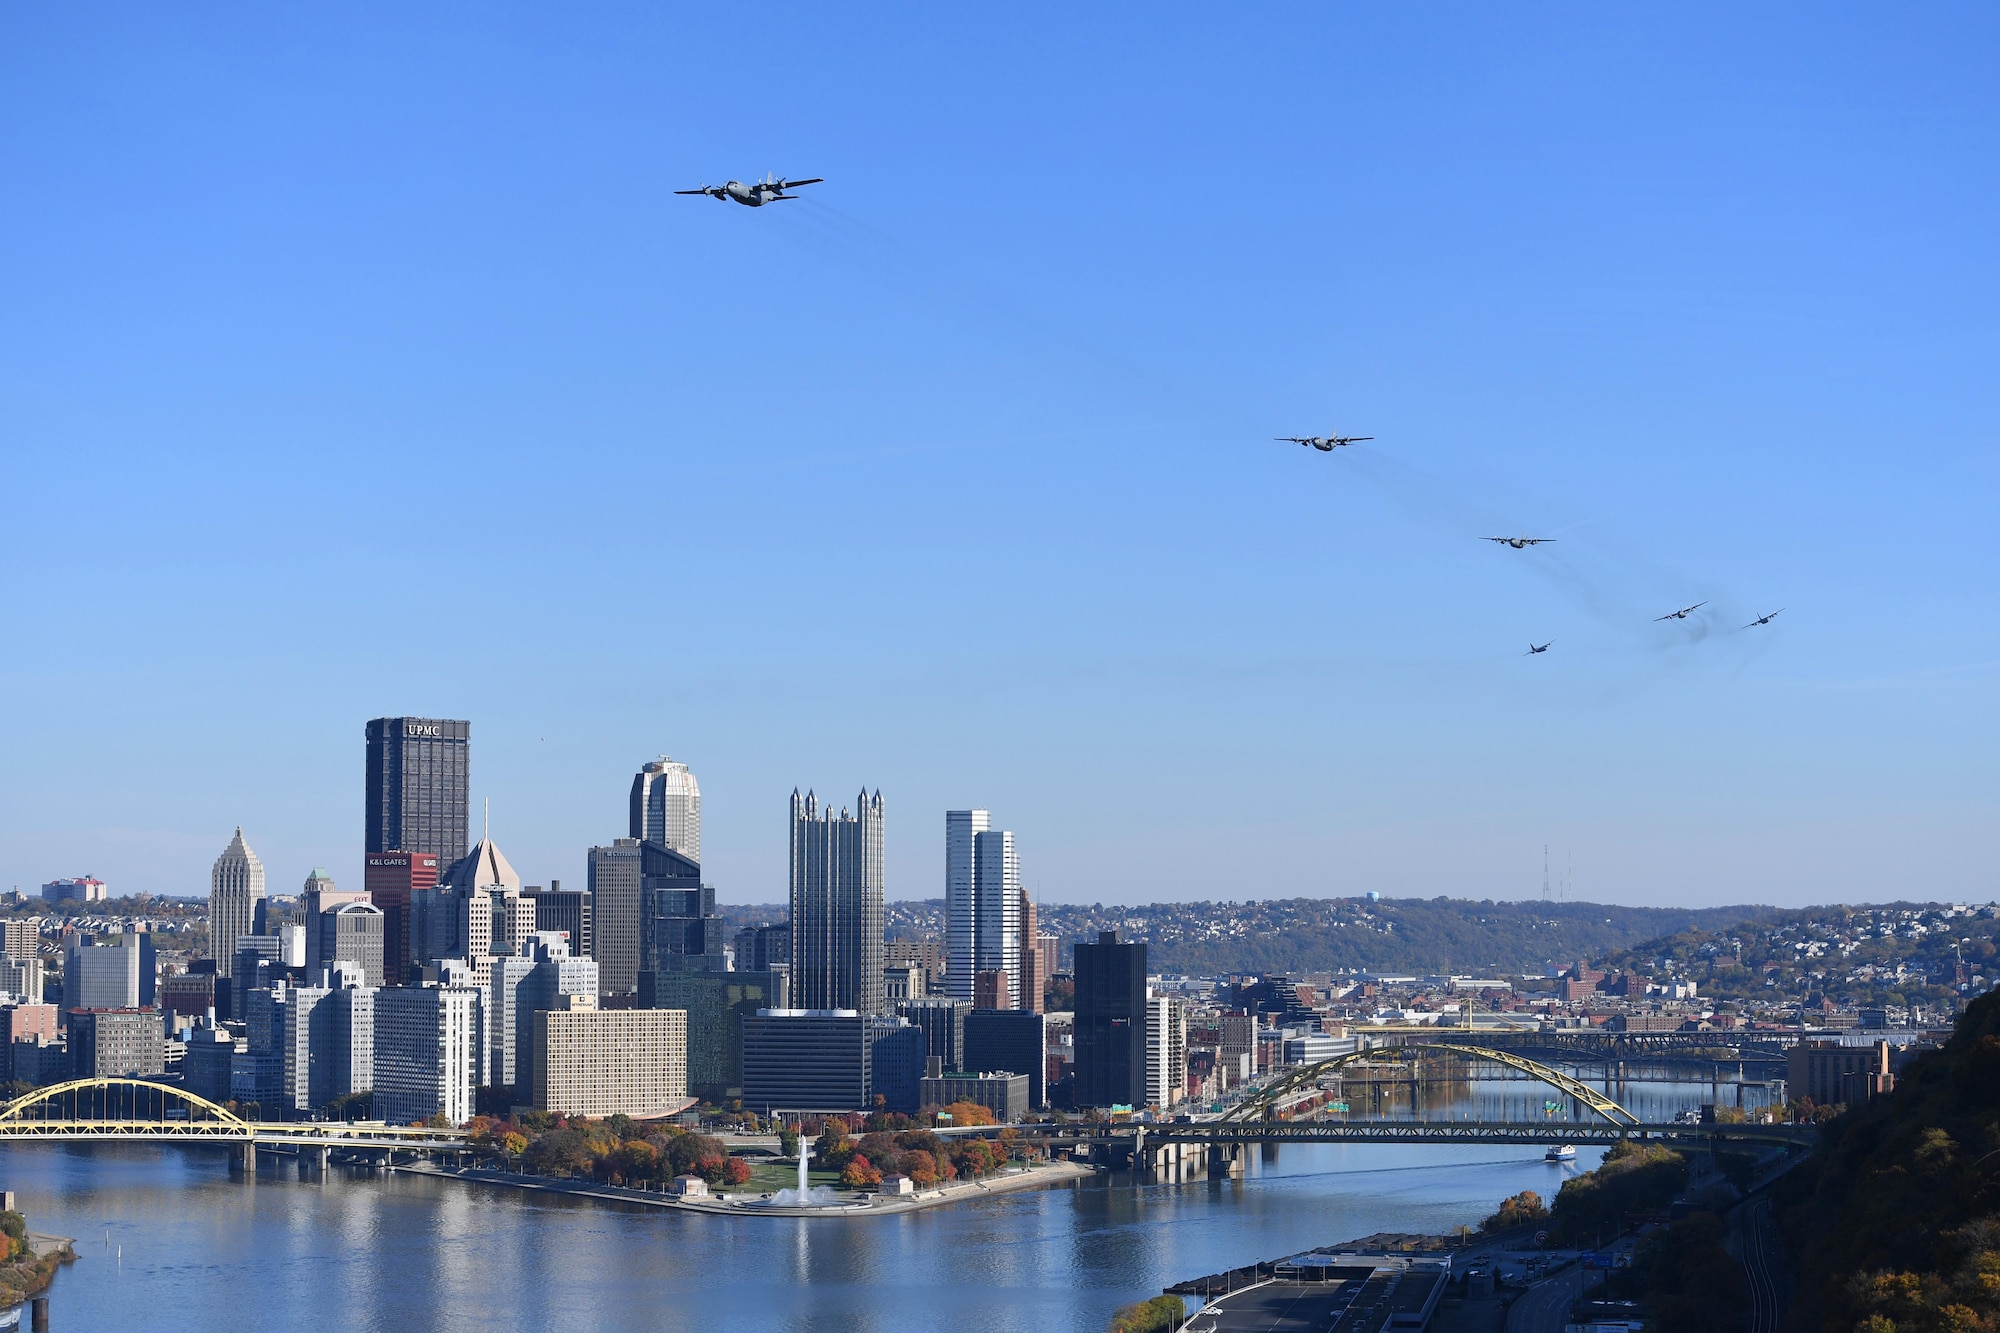 Six C-130 Hercules aircraft fly over the city of Pittsburgh, Pennsylvania, November 6, 2016. This flyover signaled the end of what could be the last C-130H generation exercise at Pittsburgh International Airport Air Reserve Station before a potential C-17 mission change. (U.S. Air Force photo by Staff Sgt. Marjorie A. Bowlden)